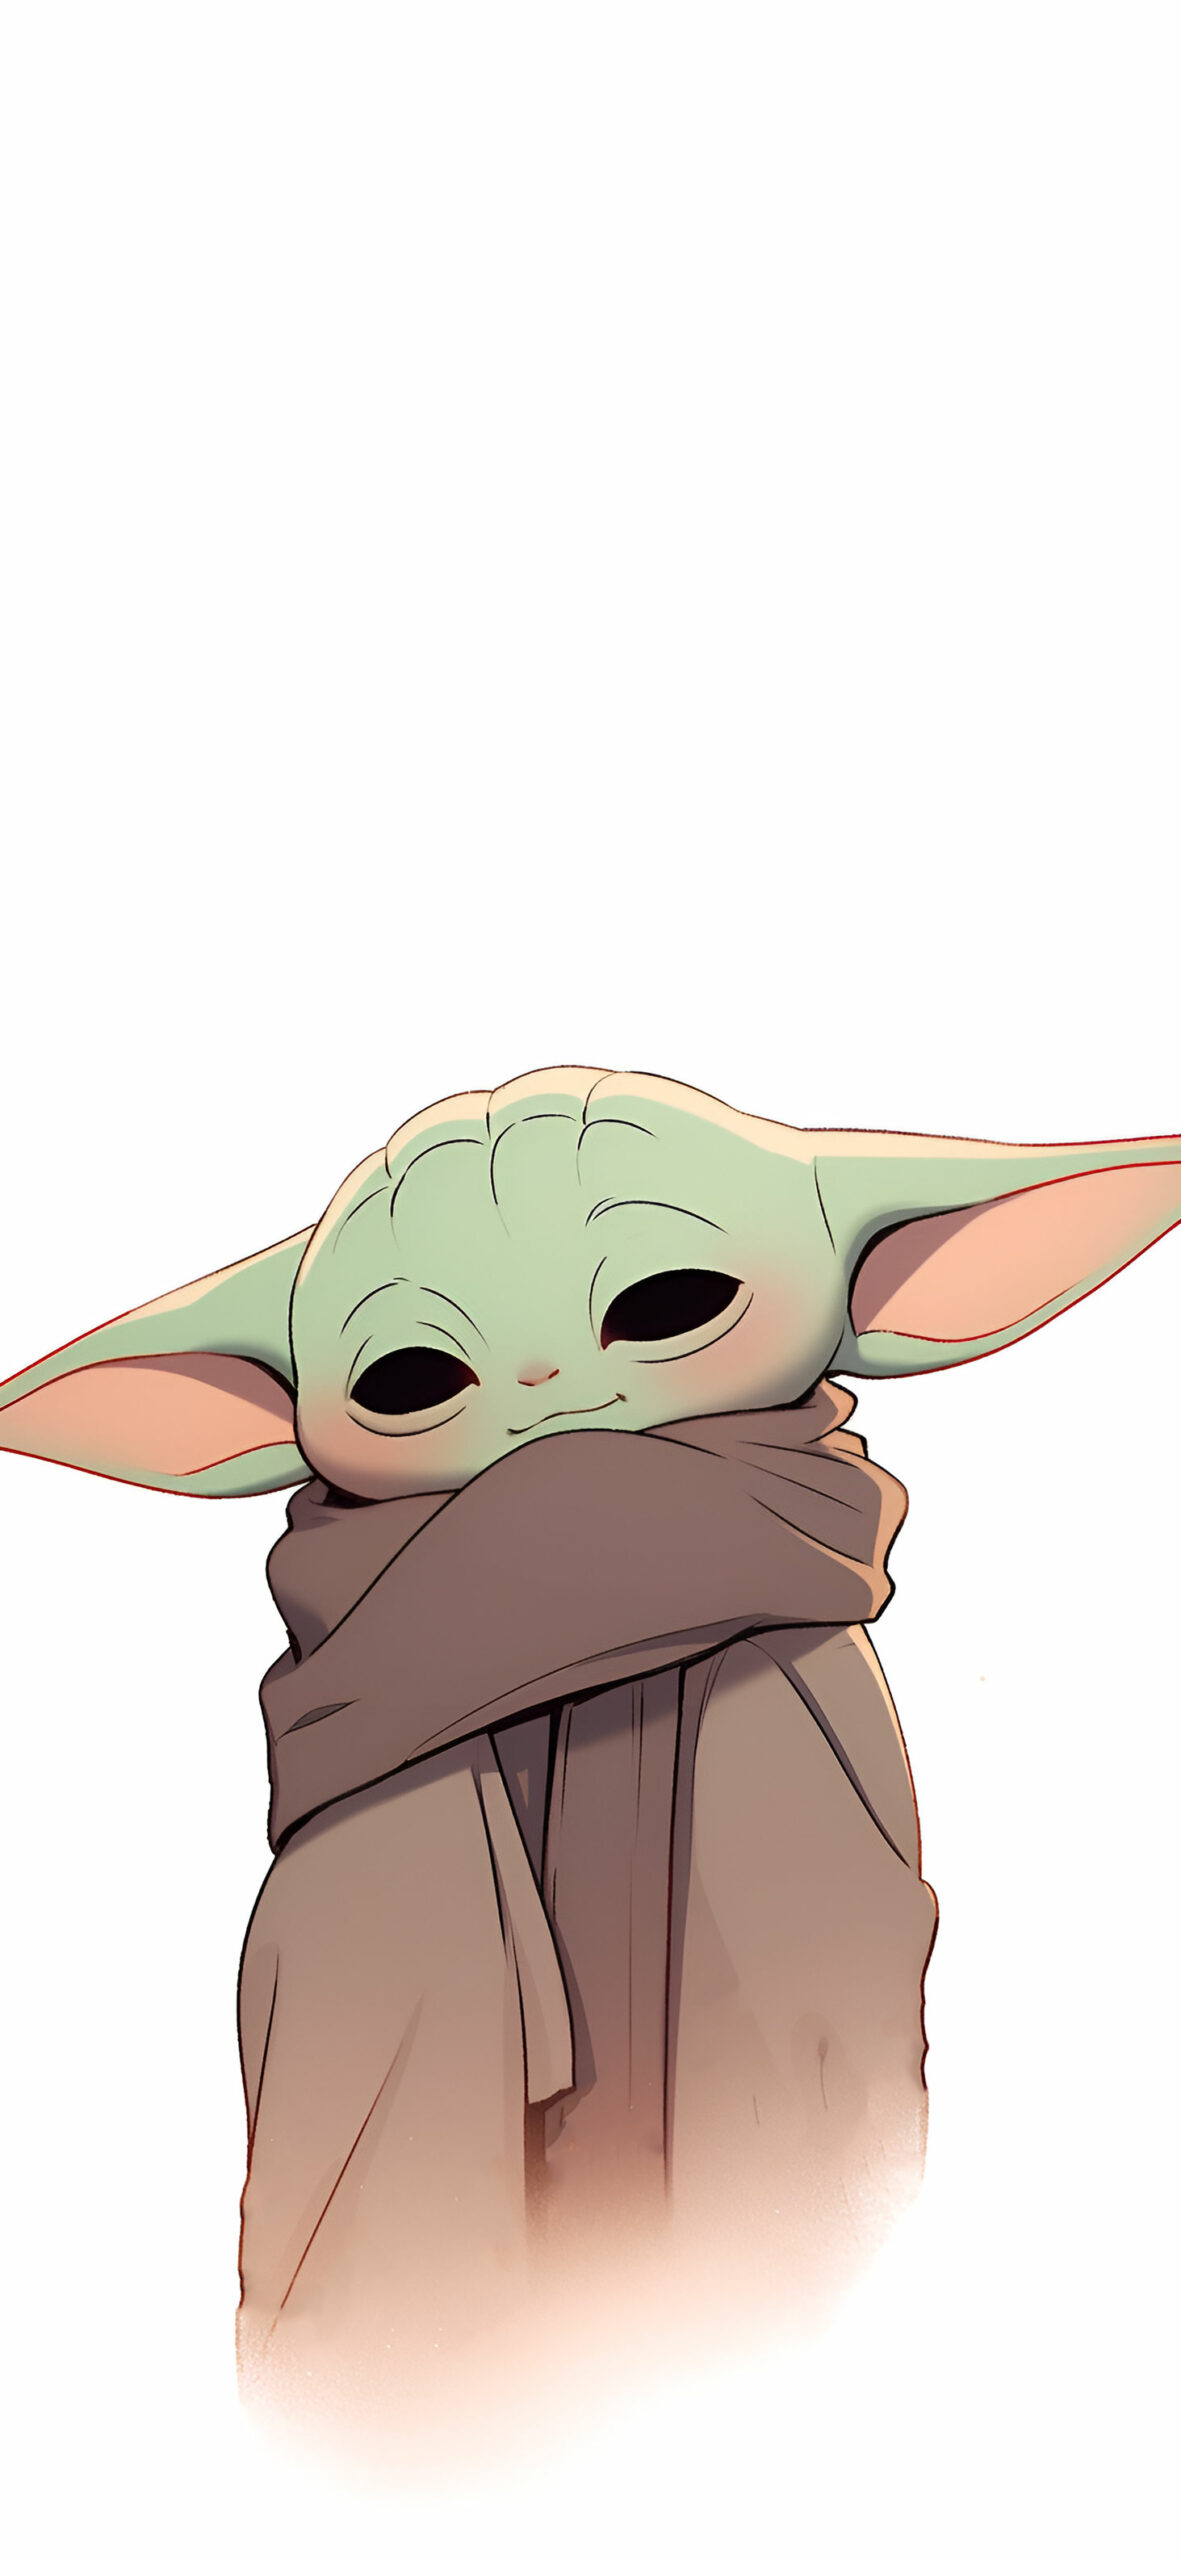 Tranquil baby yoda on white background wallpaper Star wars aes